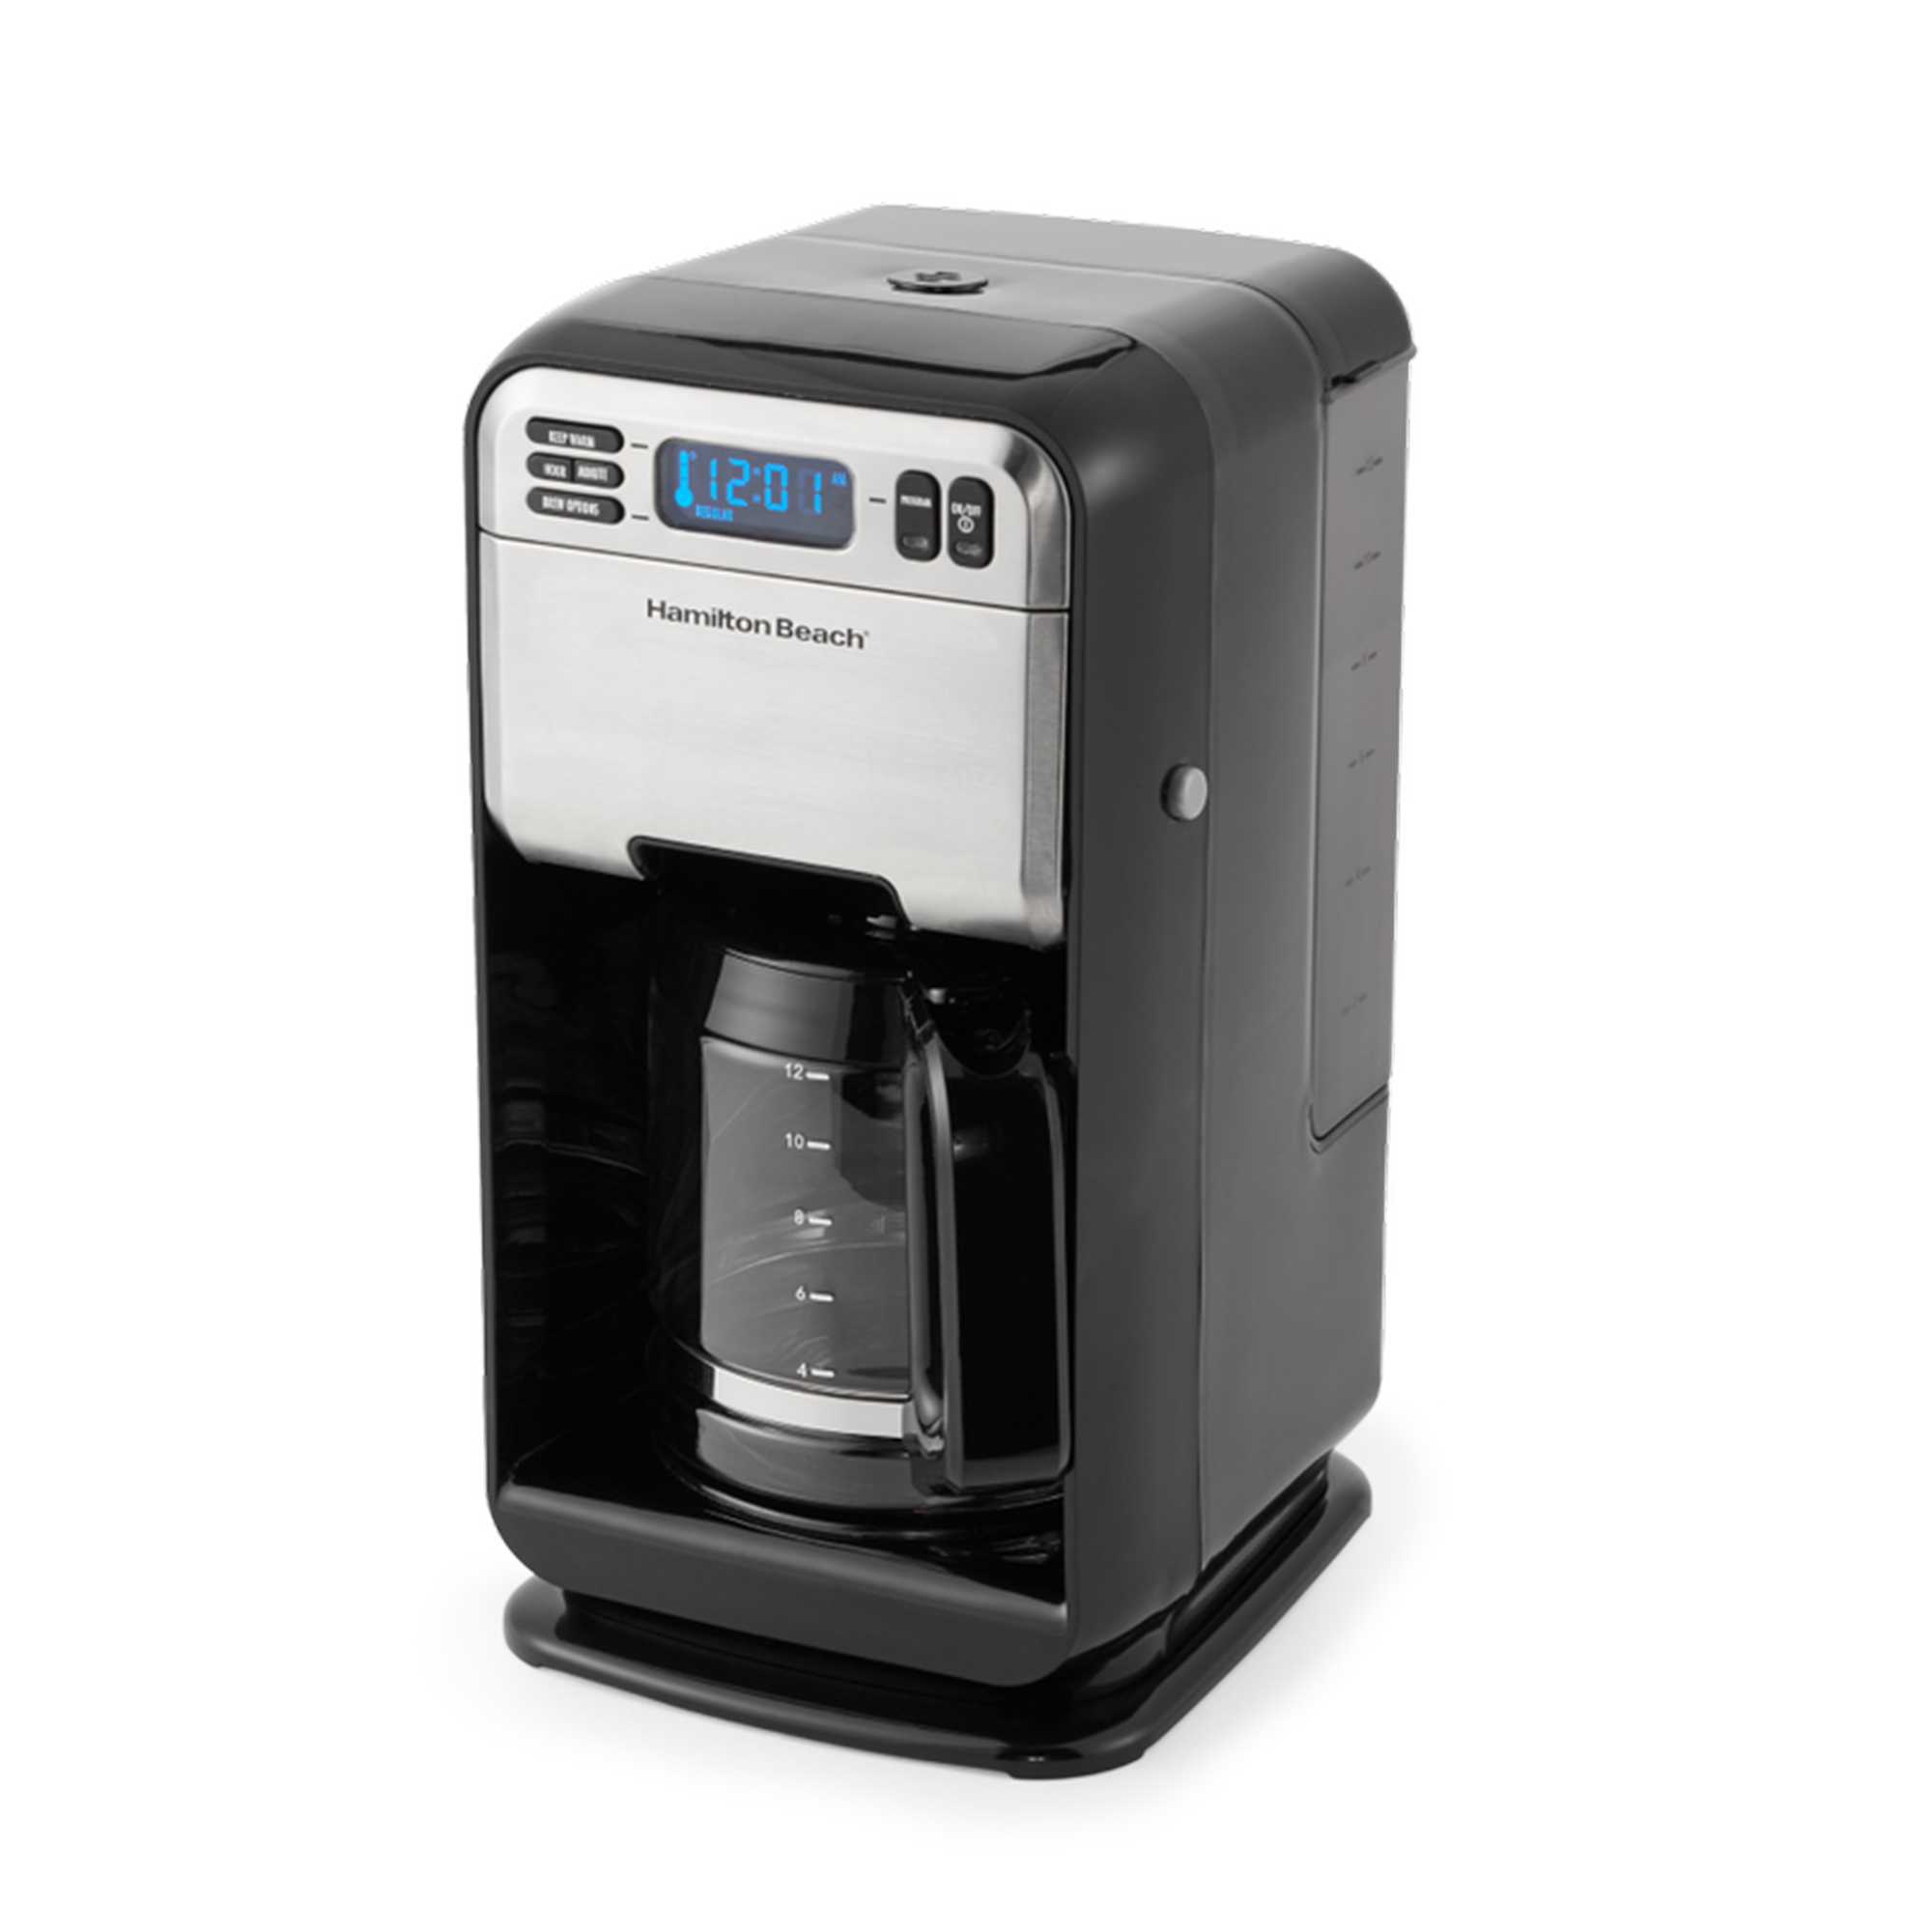 Hamilton Beach 12 Cup Digital Automatic LCD Programmable Coffee Maker Brewer - image 1 of 6